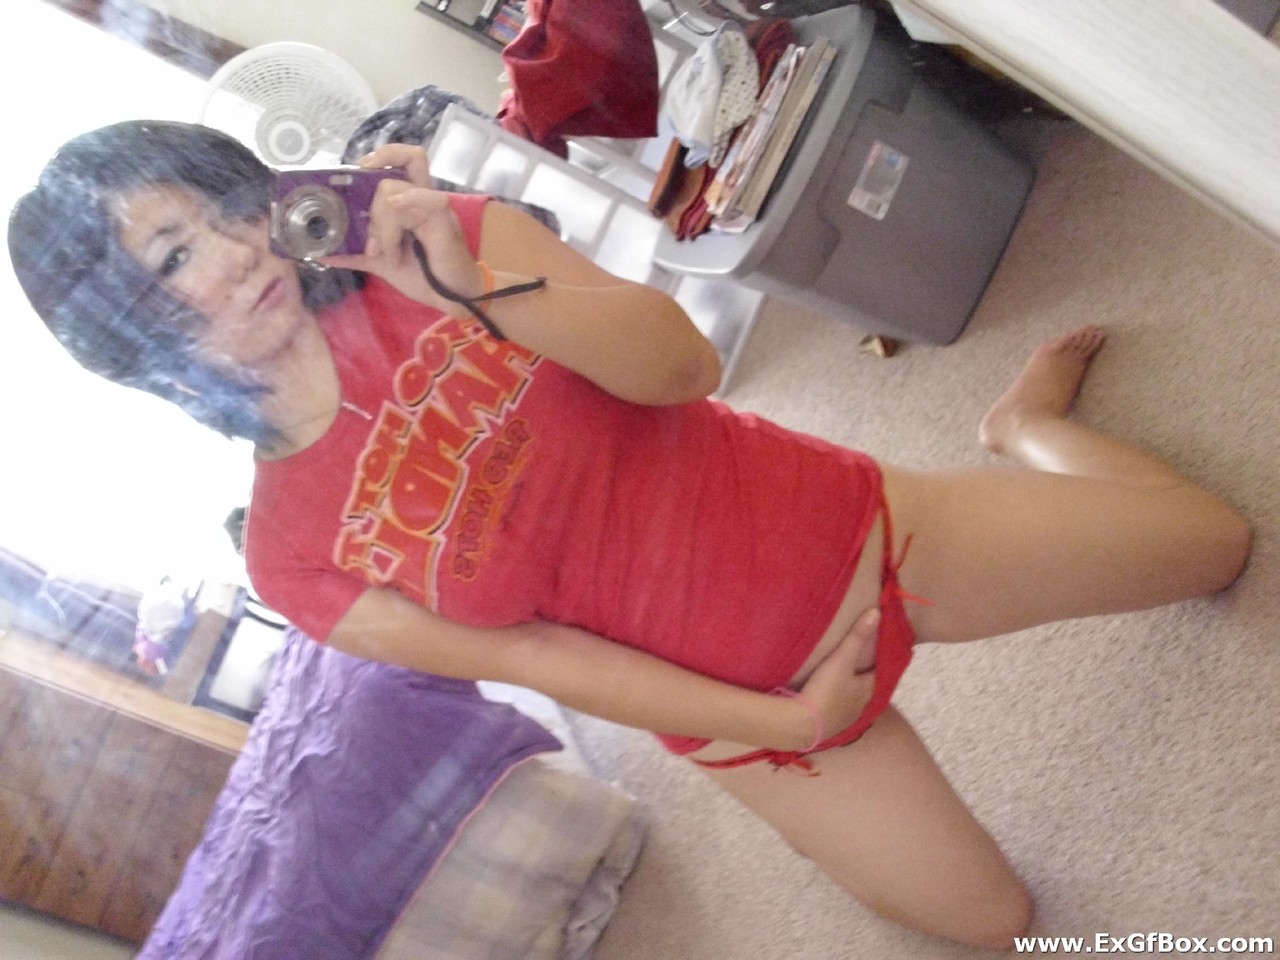 Bootylicious teenage girlfriend takes selfies of her hot body while stripping foto porno #426010453 | Ex GF Box Pics, Selfie, porno móvil